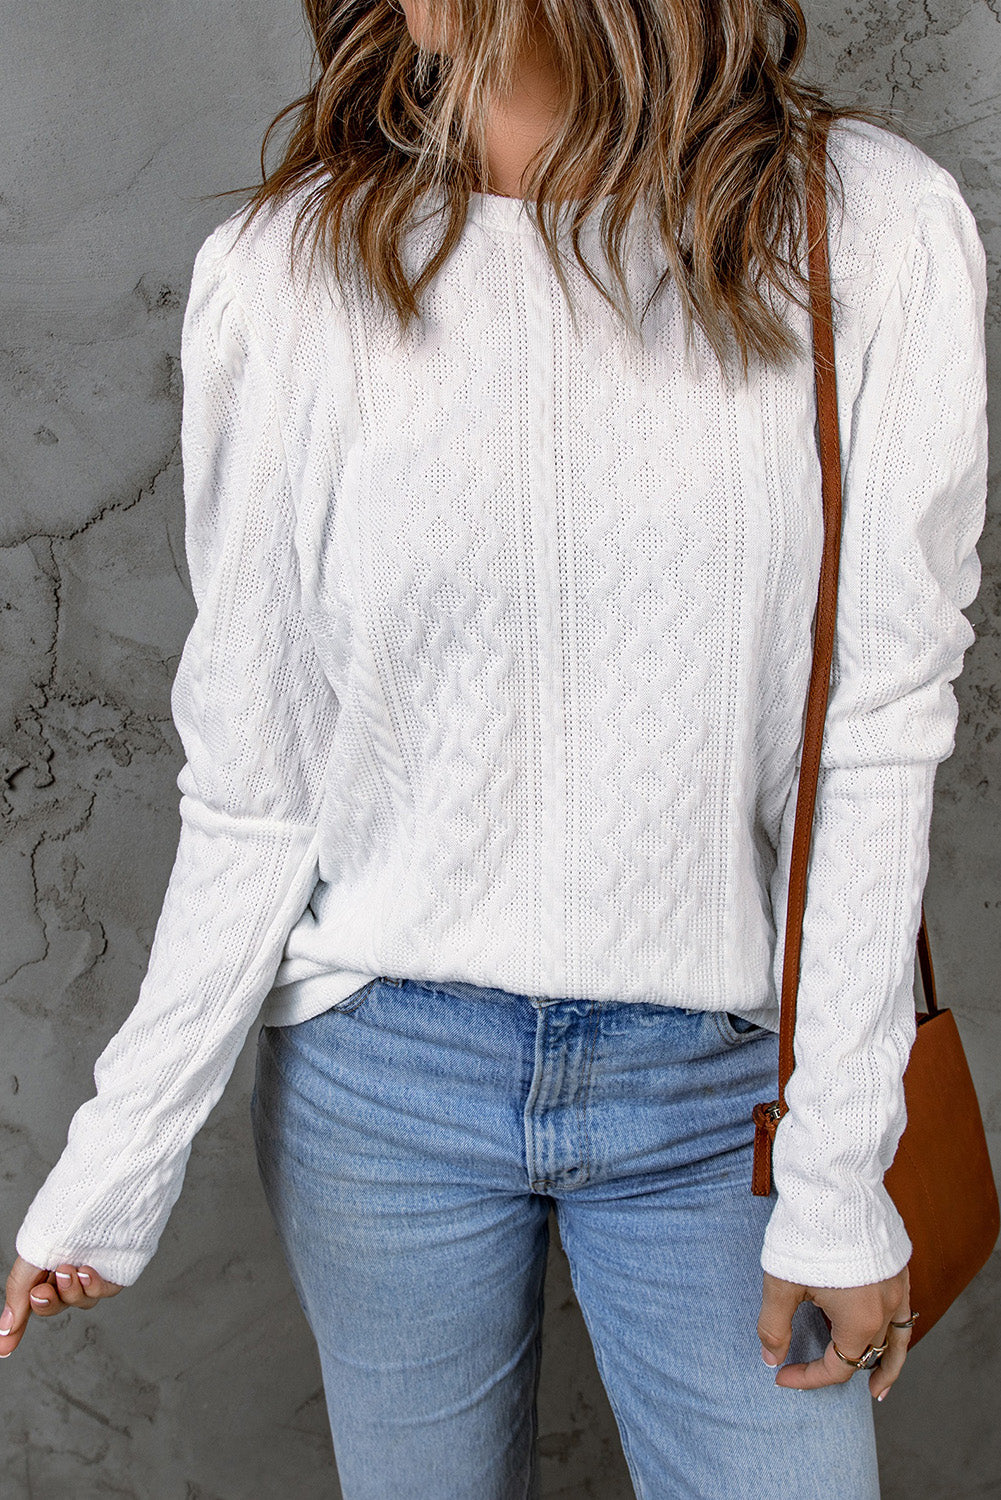 White Solid Color Puffy Sleeve Textured Knit Top Long Sleeve Tops JT's Designer Fashion